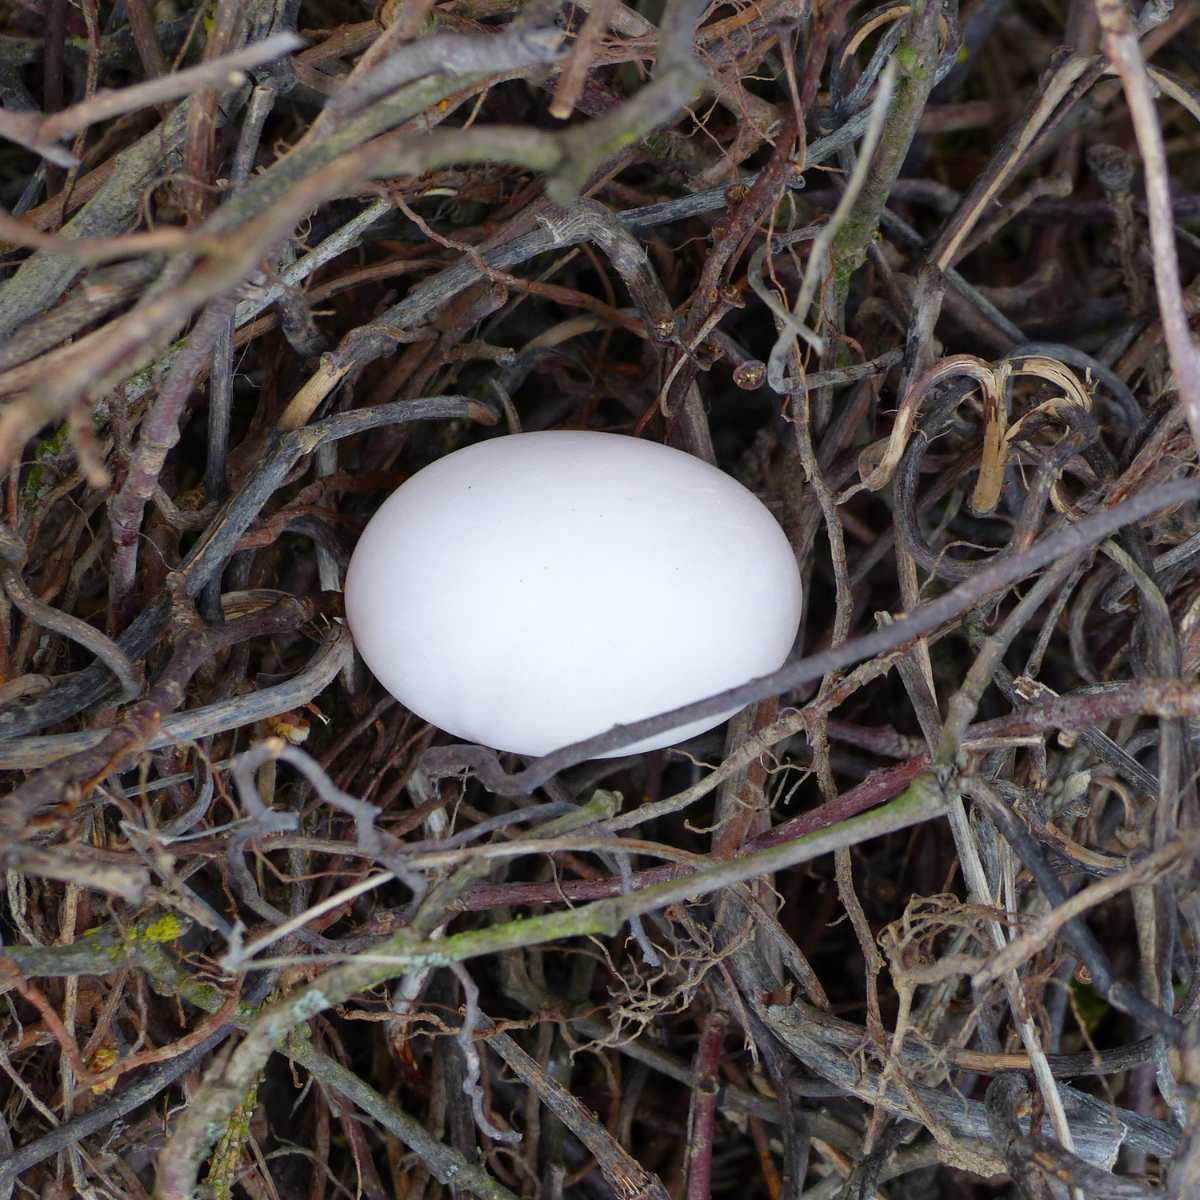 A pigeon egg in a nest.